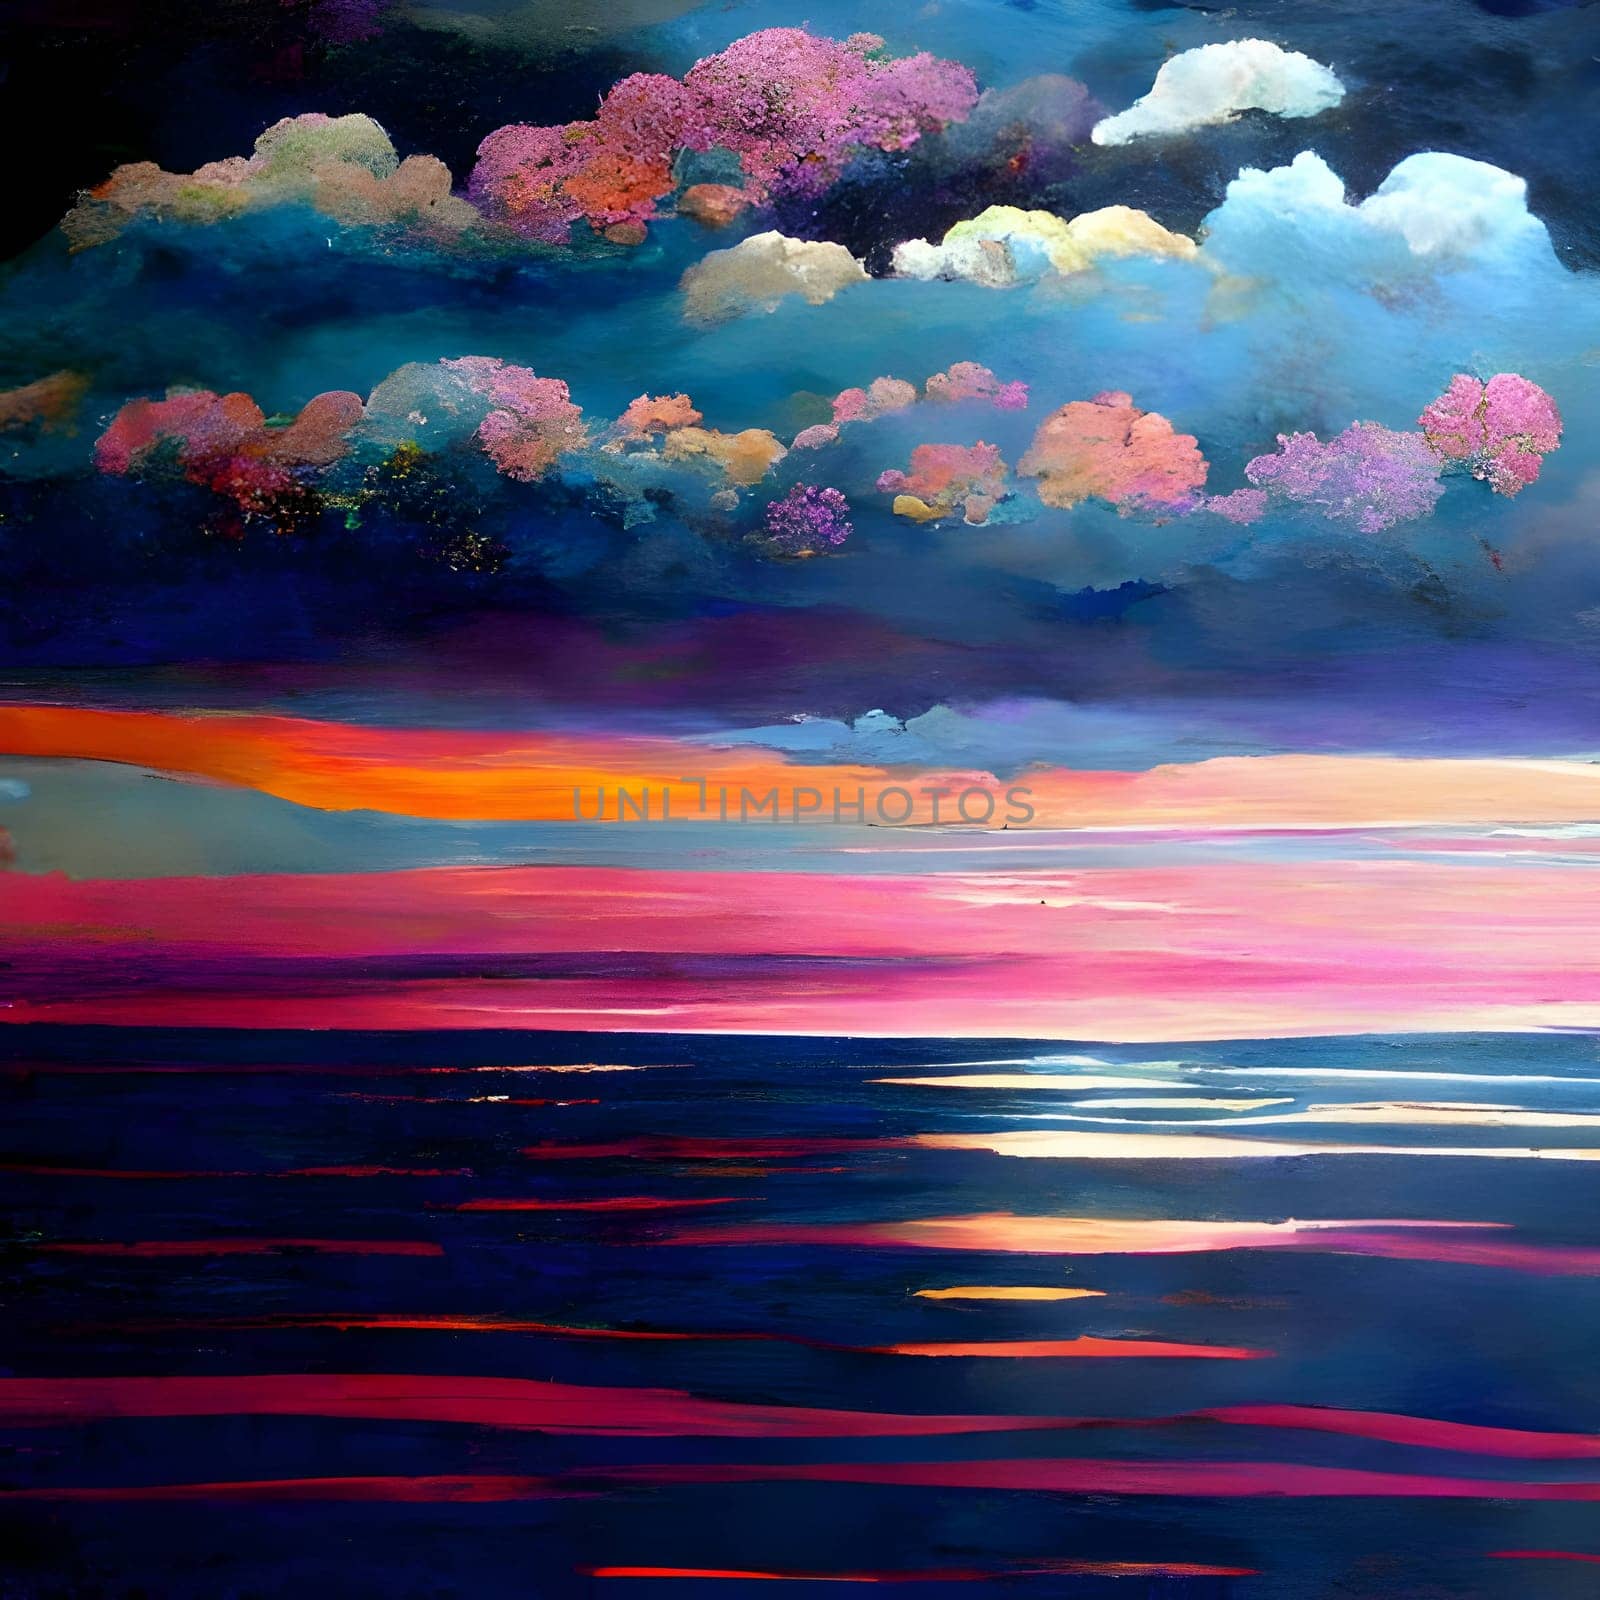 Abstract landscape: Vibrant hues of orange and purple blend across the canvas, depicting a surreal seascape with a setting sun and wisps of clouds in the sky.